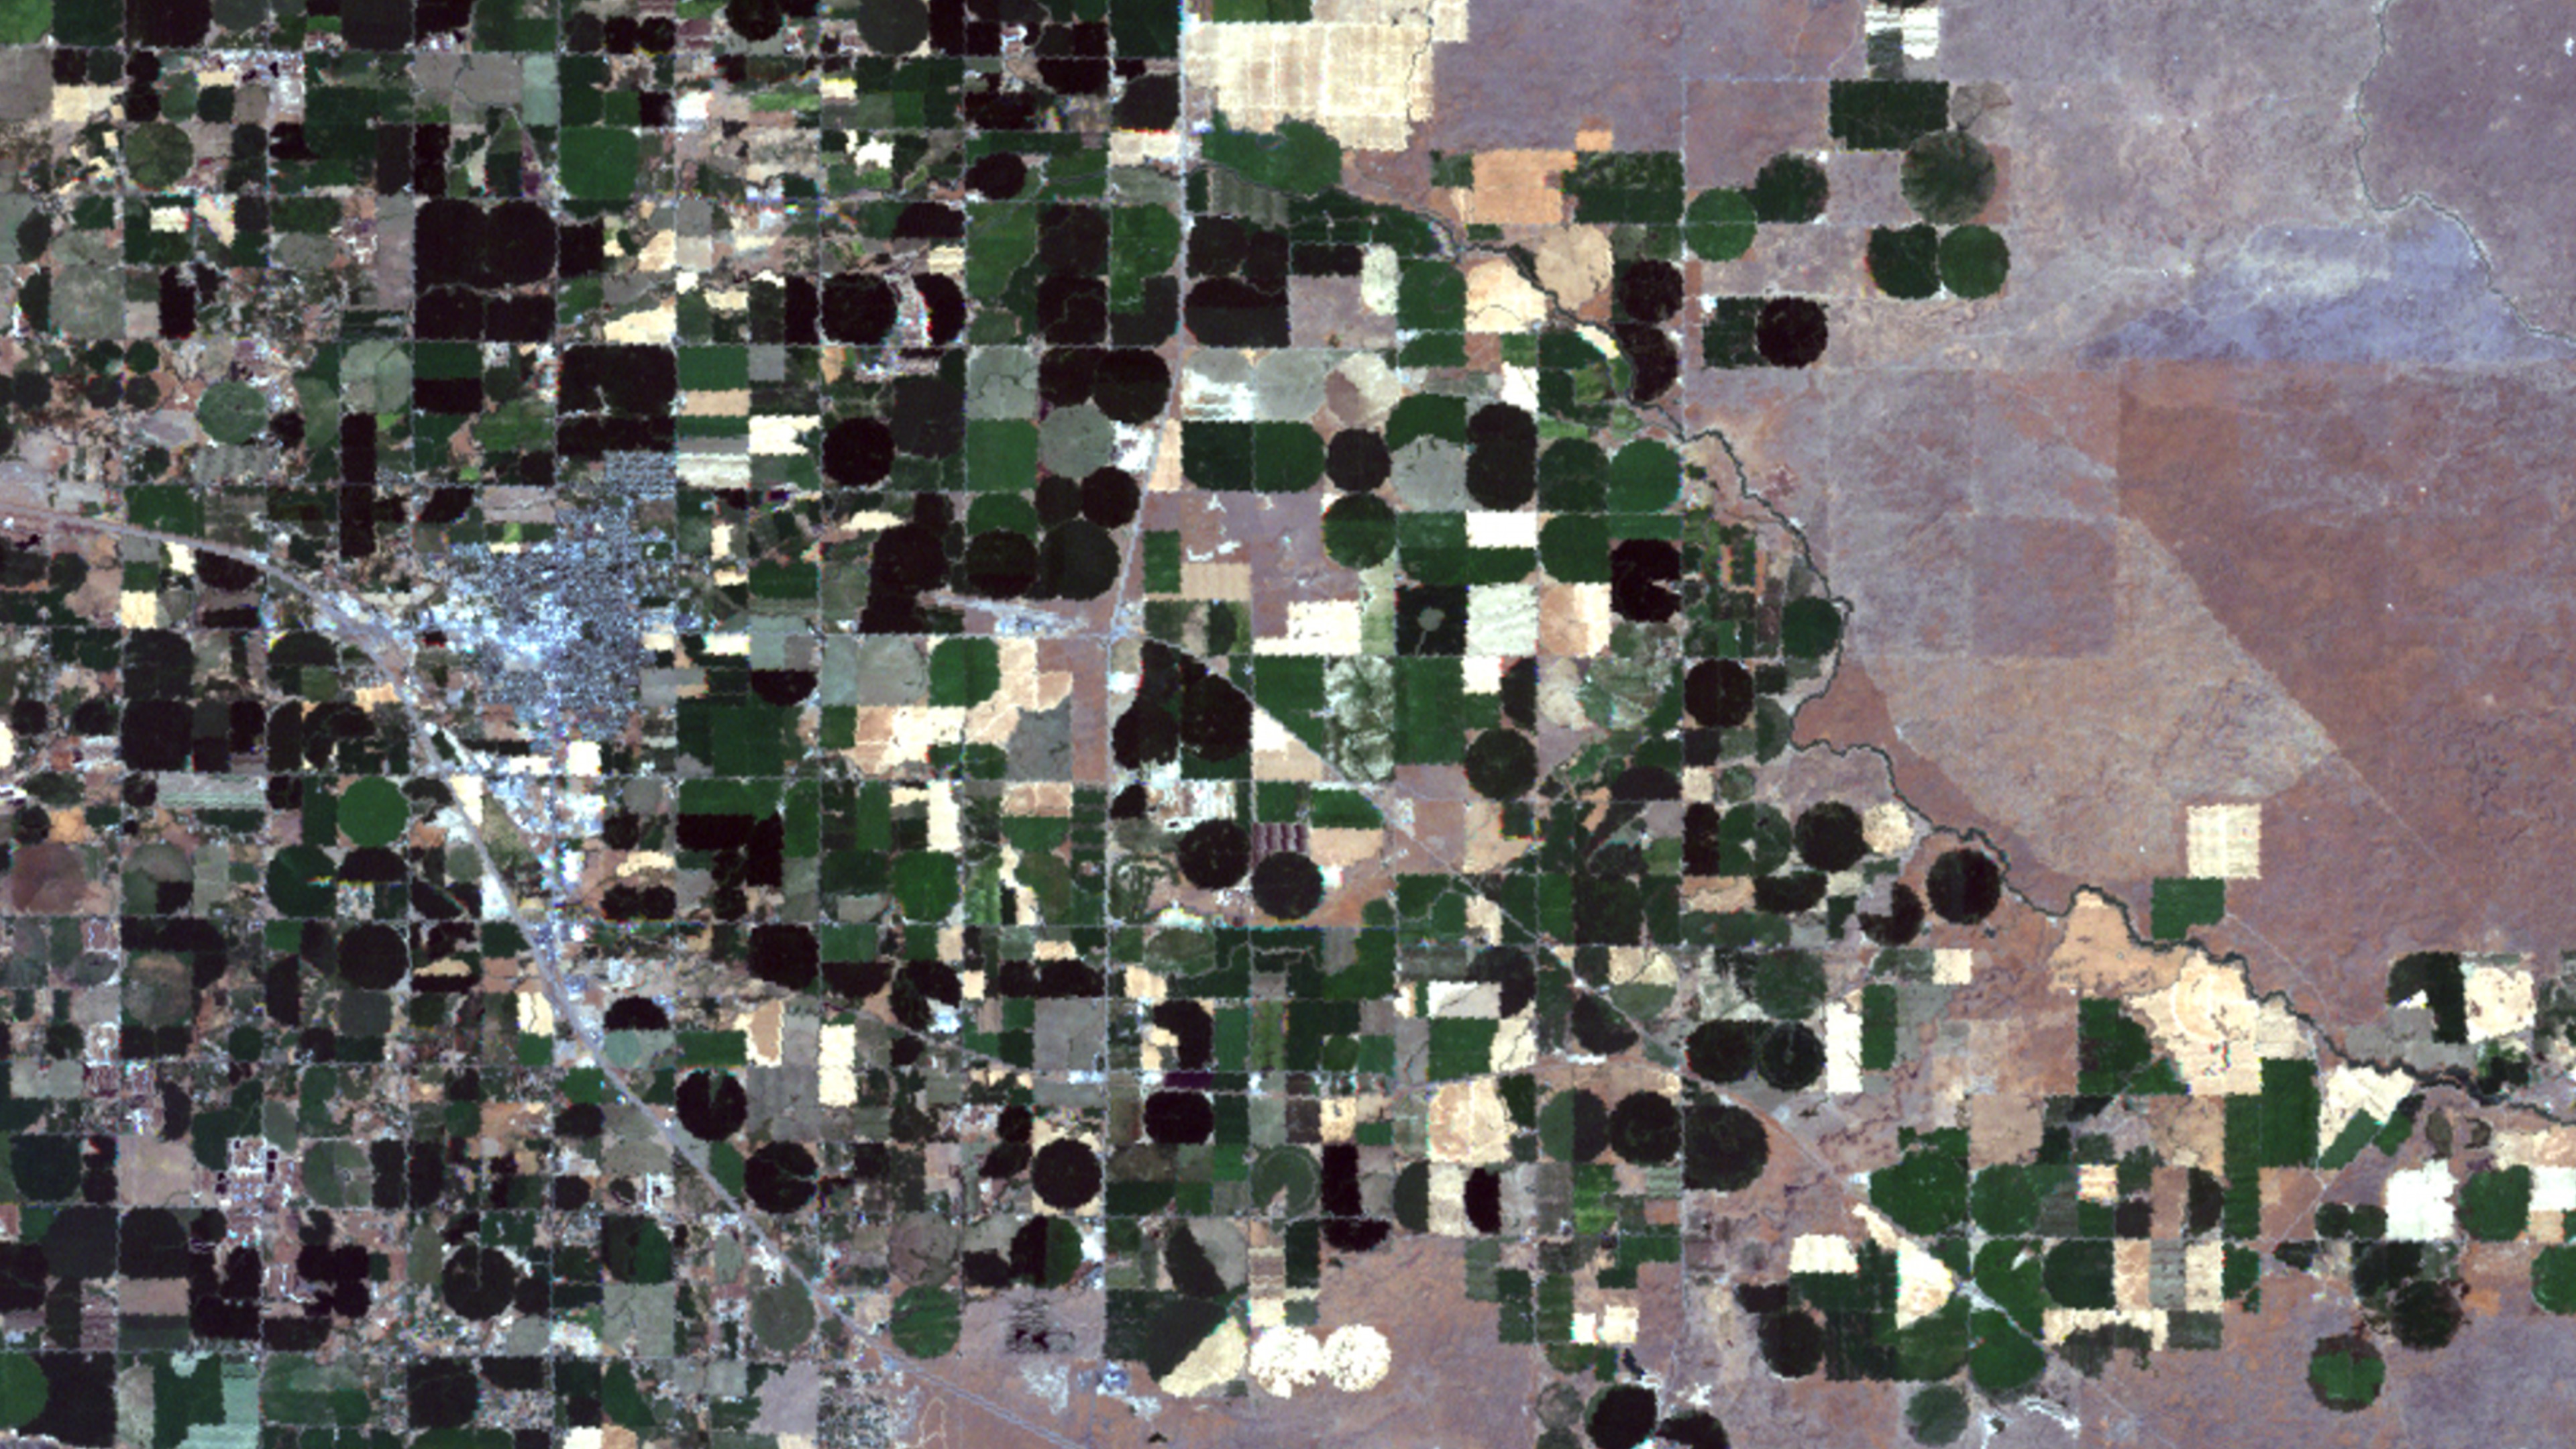 This visible spectrum image shows an agricultural region in Idaho. The round, green circles are individual irrigated farm fields. The image was created by combining Landsat bands 1, 2 and 3.